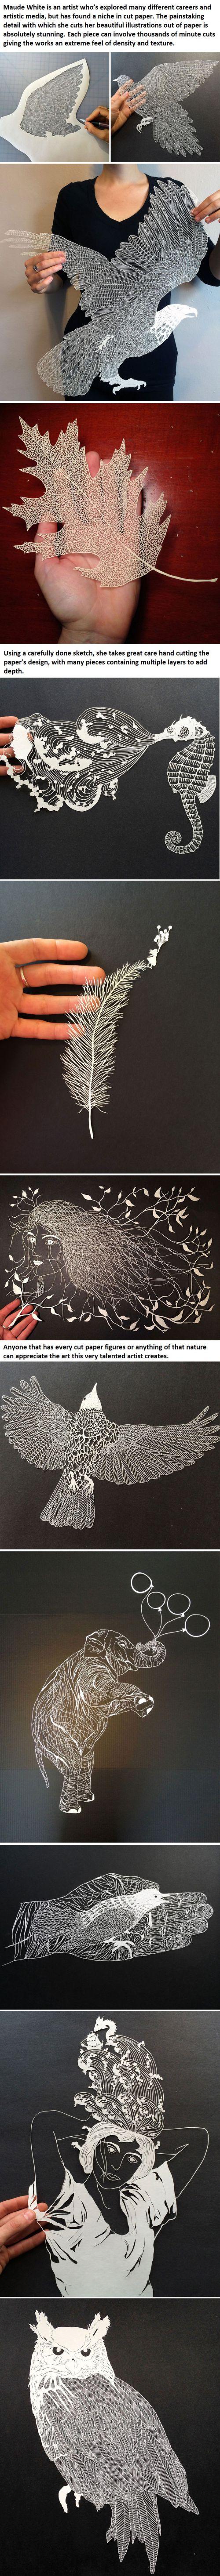 Woman Transforms Paper Into Incredibly Intricate Paper Art -   Misc